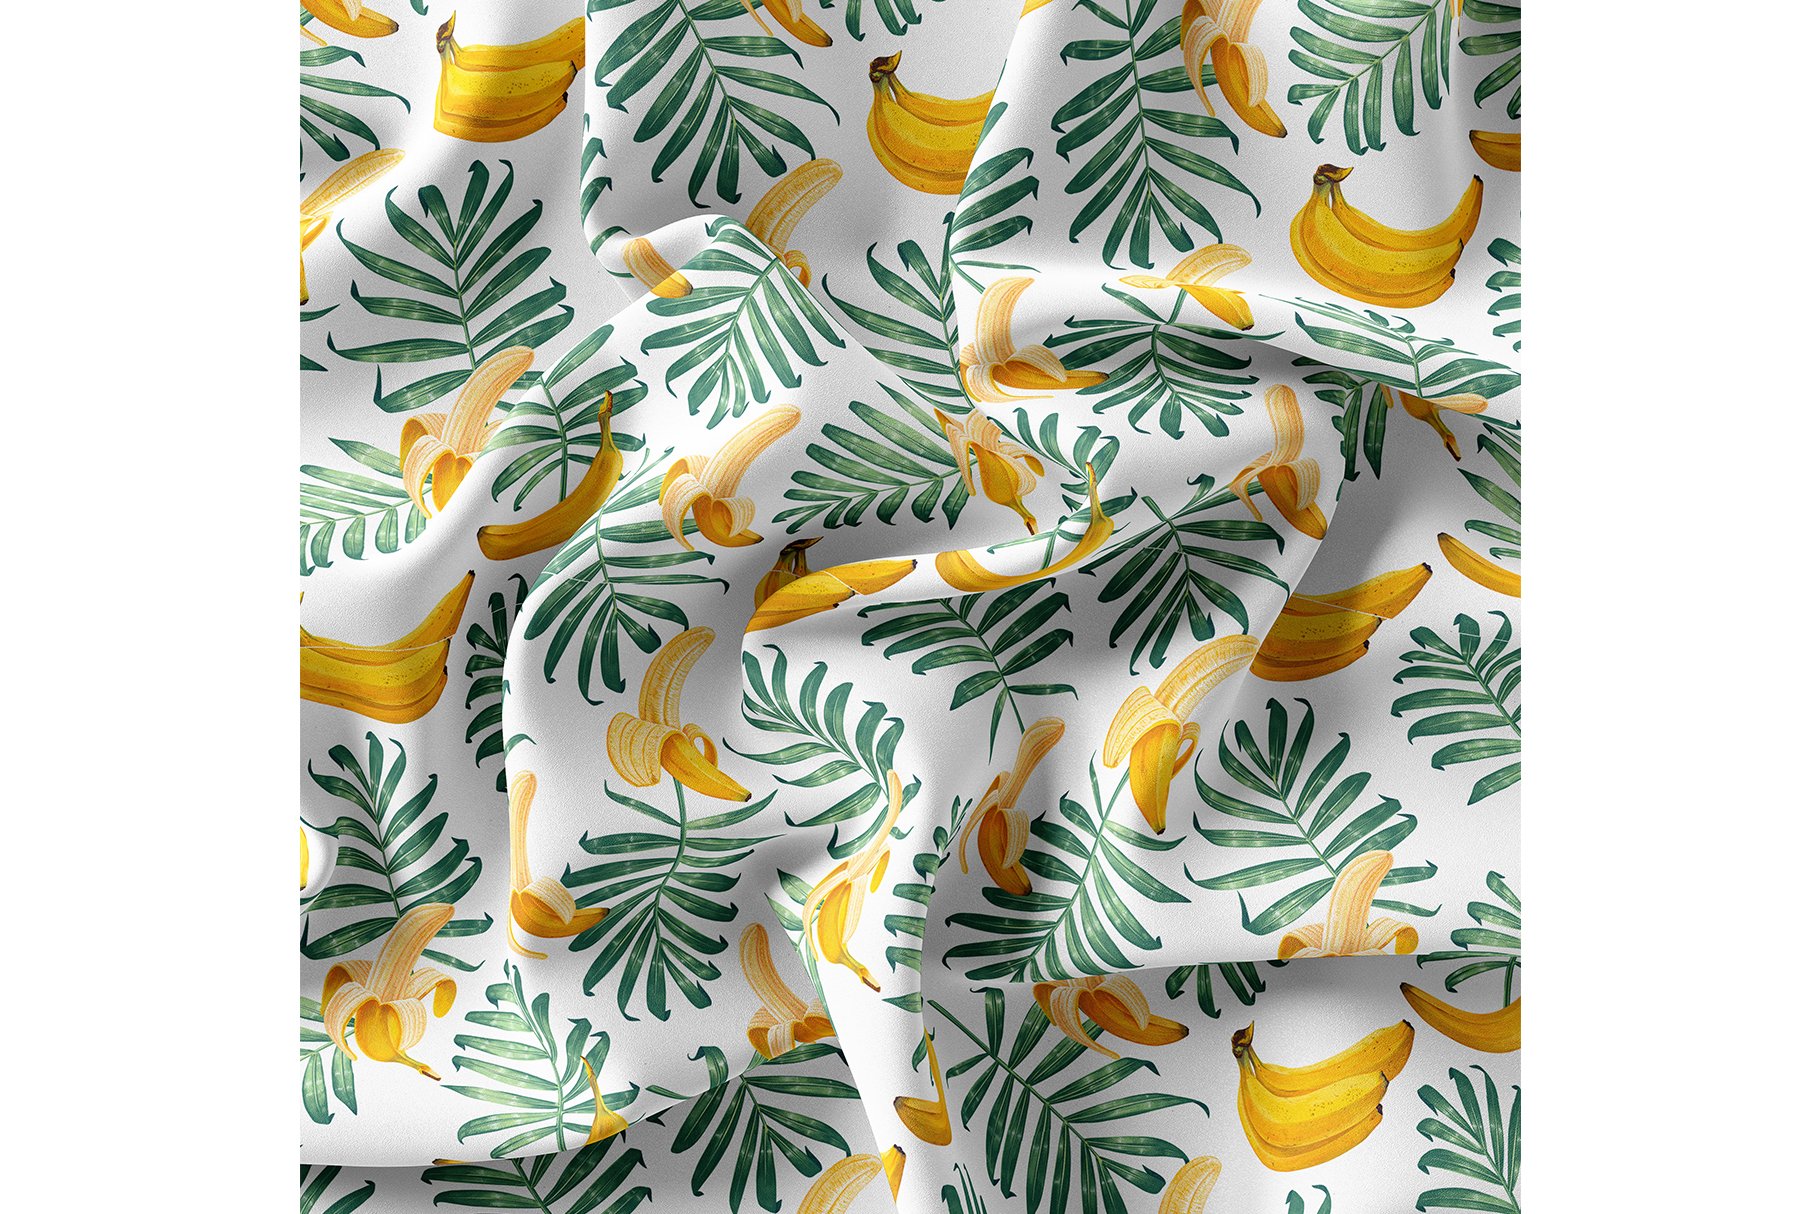 "Banana Palm Leaves" Pattern preview image.